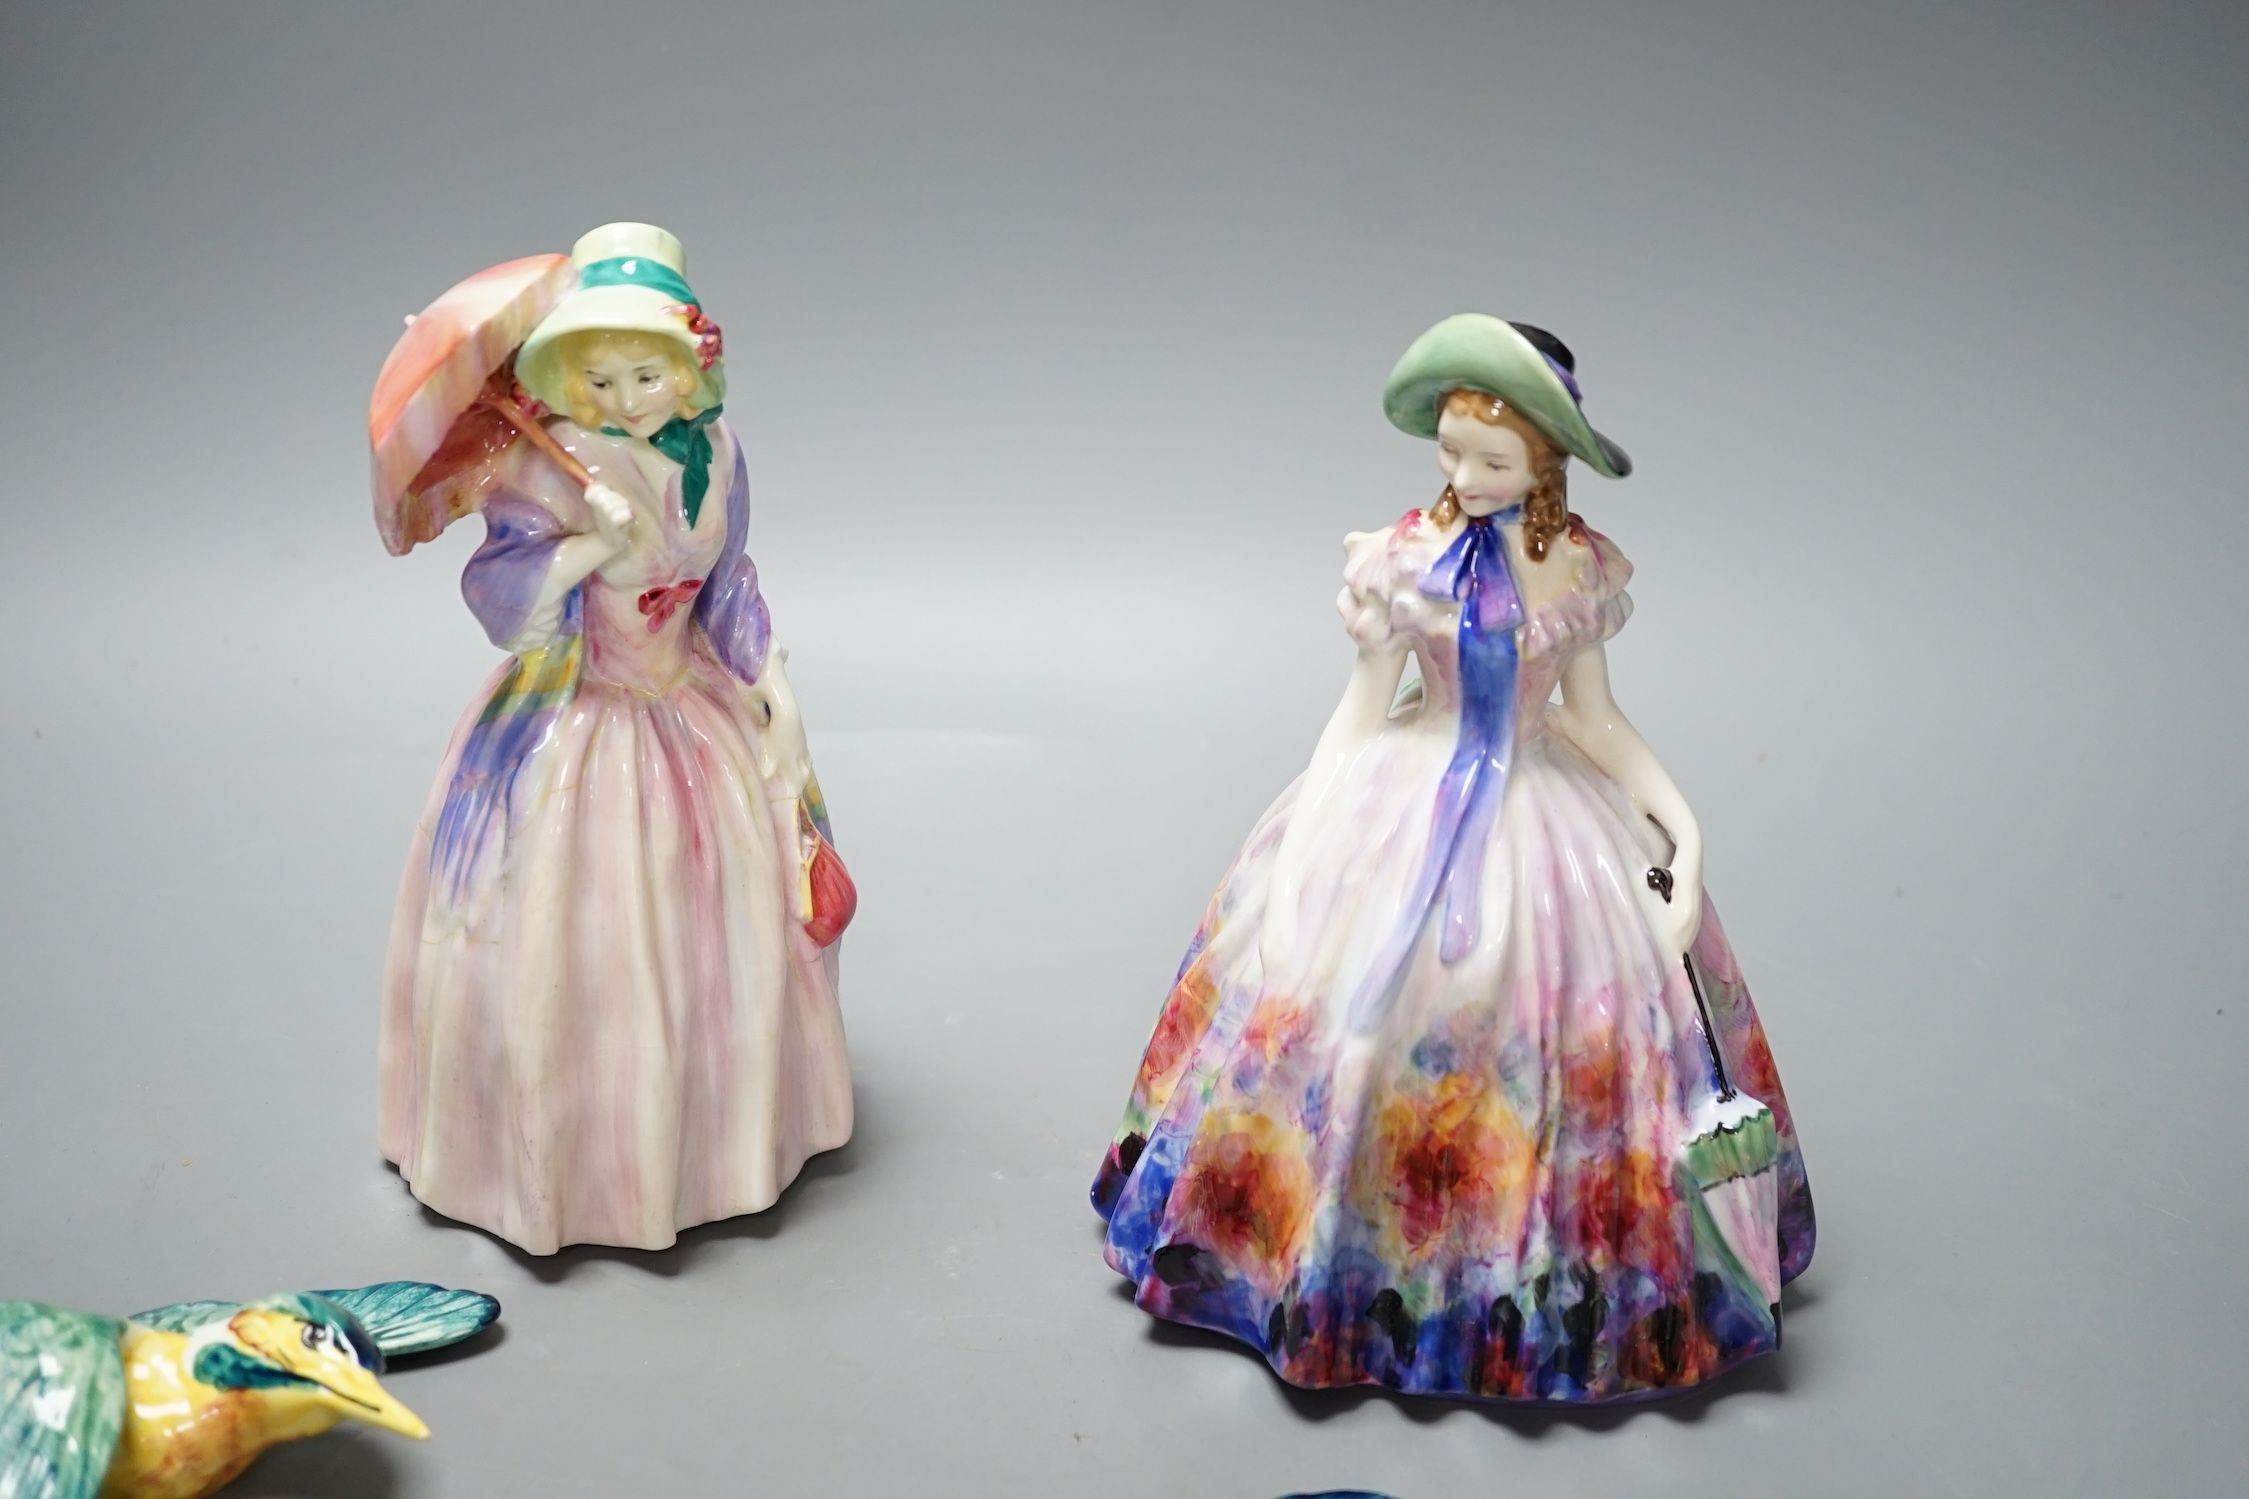 A Royal Doulton figurine: Reg No753474, Miss Demure and an Easter Day figurine: HN 2039, together - Image 3 of 8